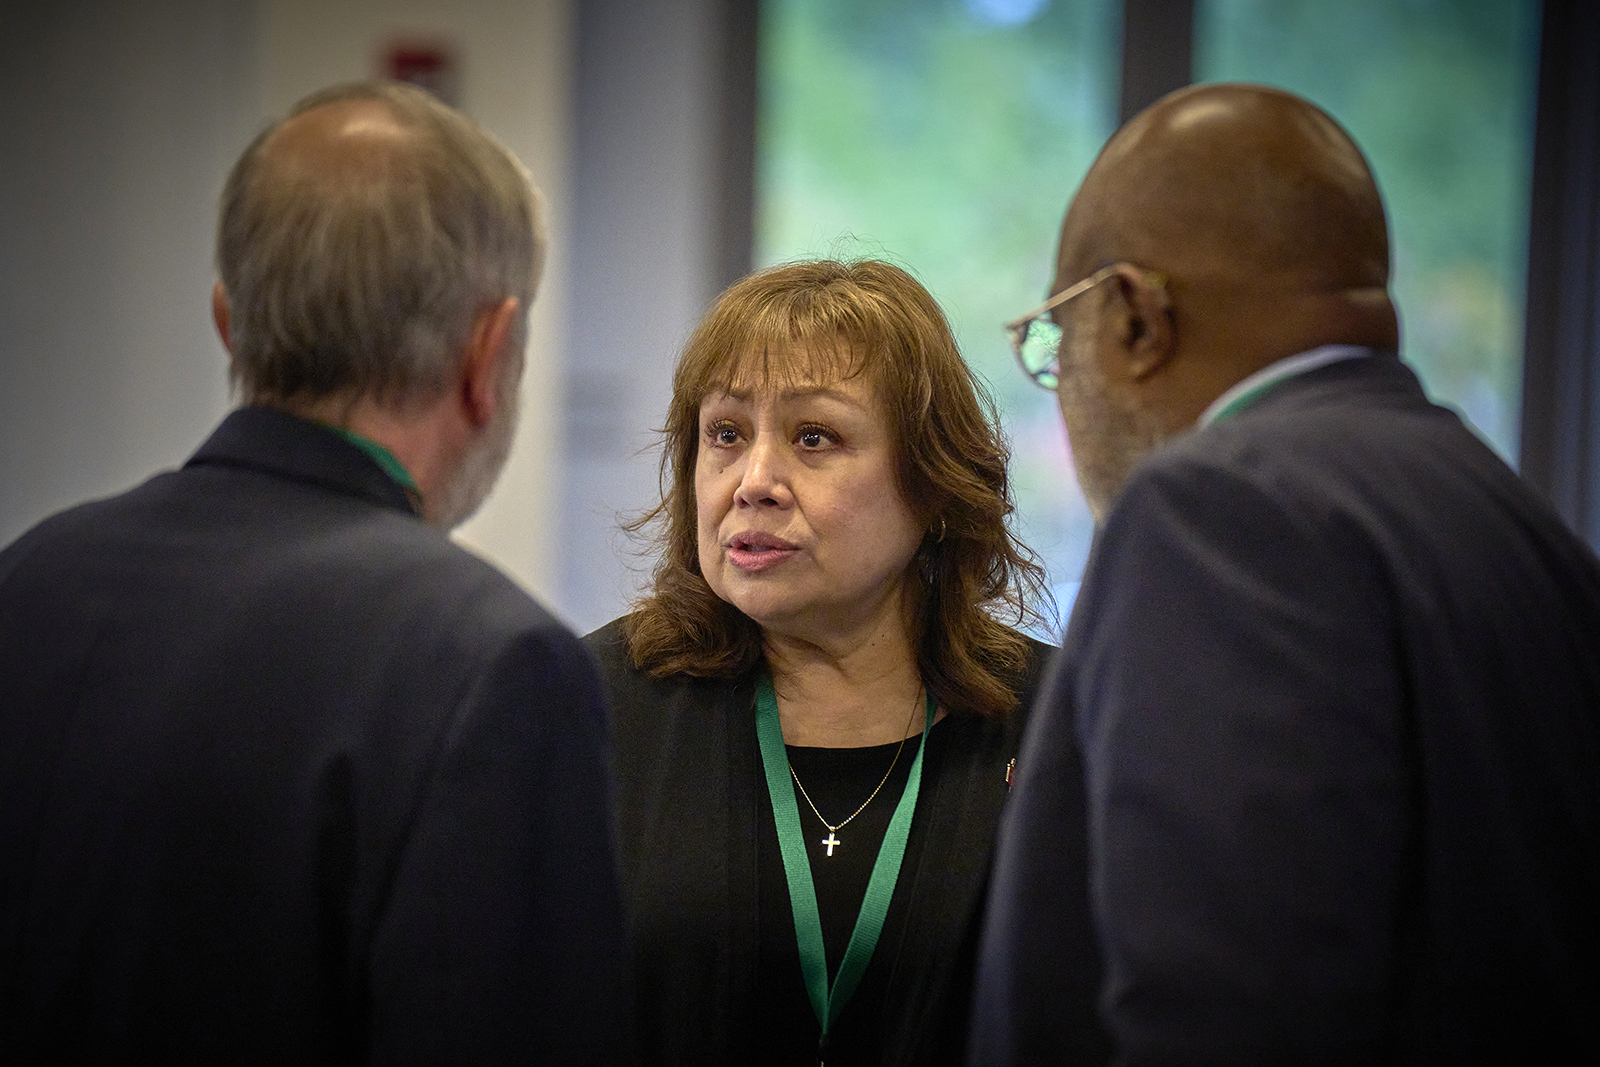 United Methodist Bishop Minerva G. Carcaño talks with counsel--the Rev. Scott Campbell, left, and Judge Jon Gray--during her church trial on Sept. 19, 2023, in Glenview, Illinois. Photo by Paul Jeffrey, UM News